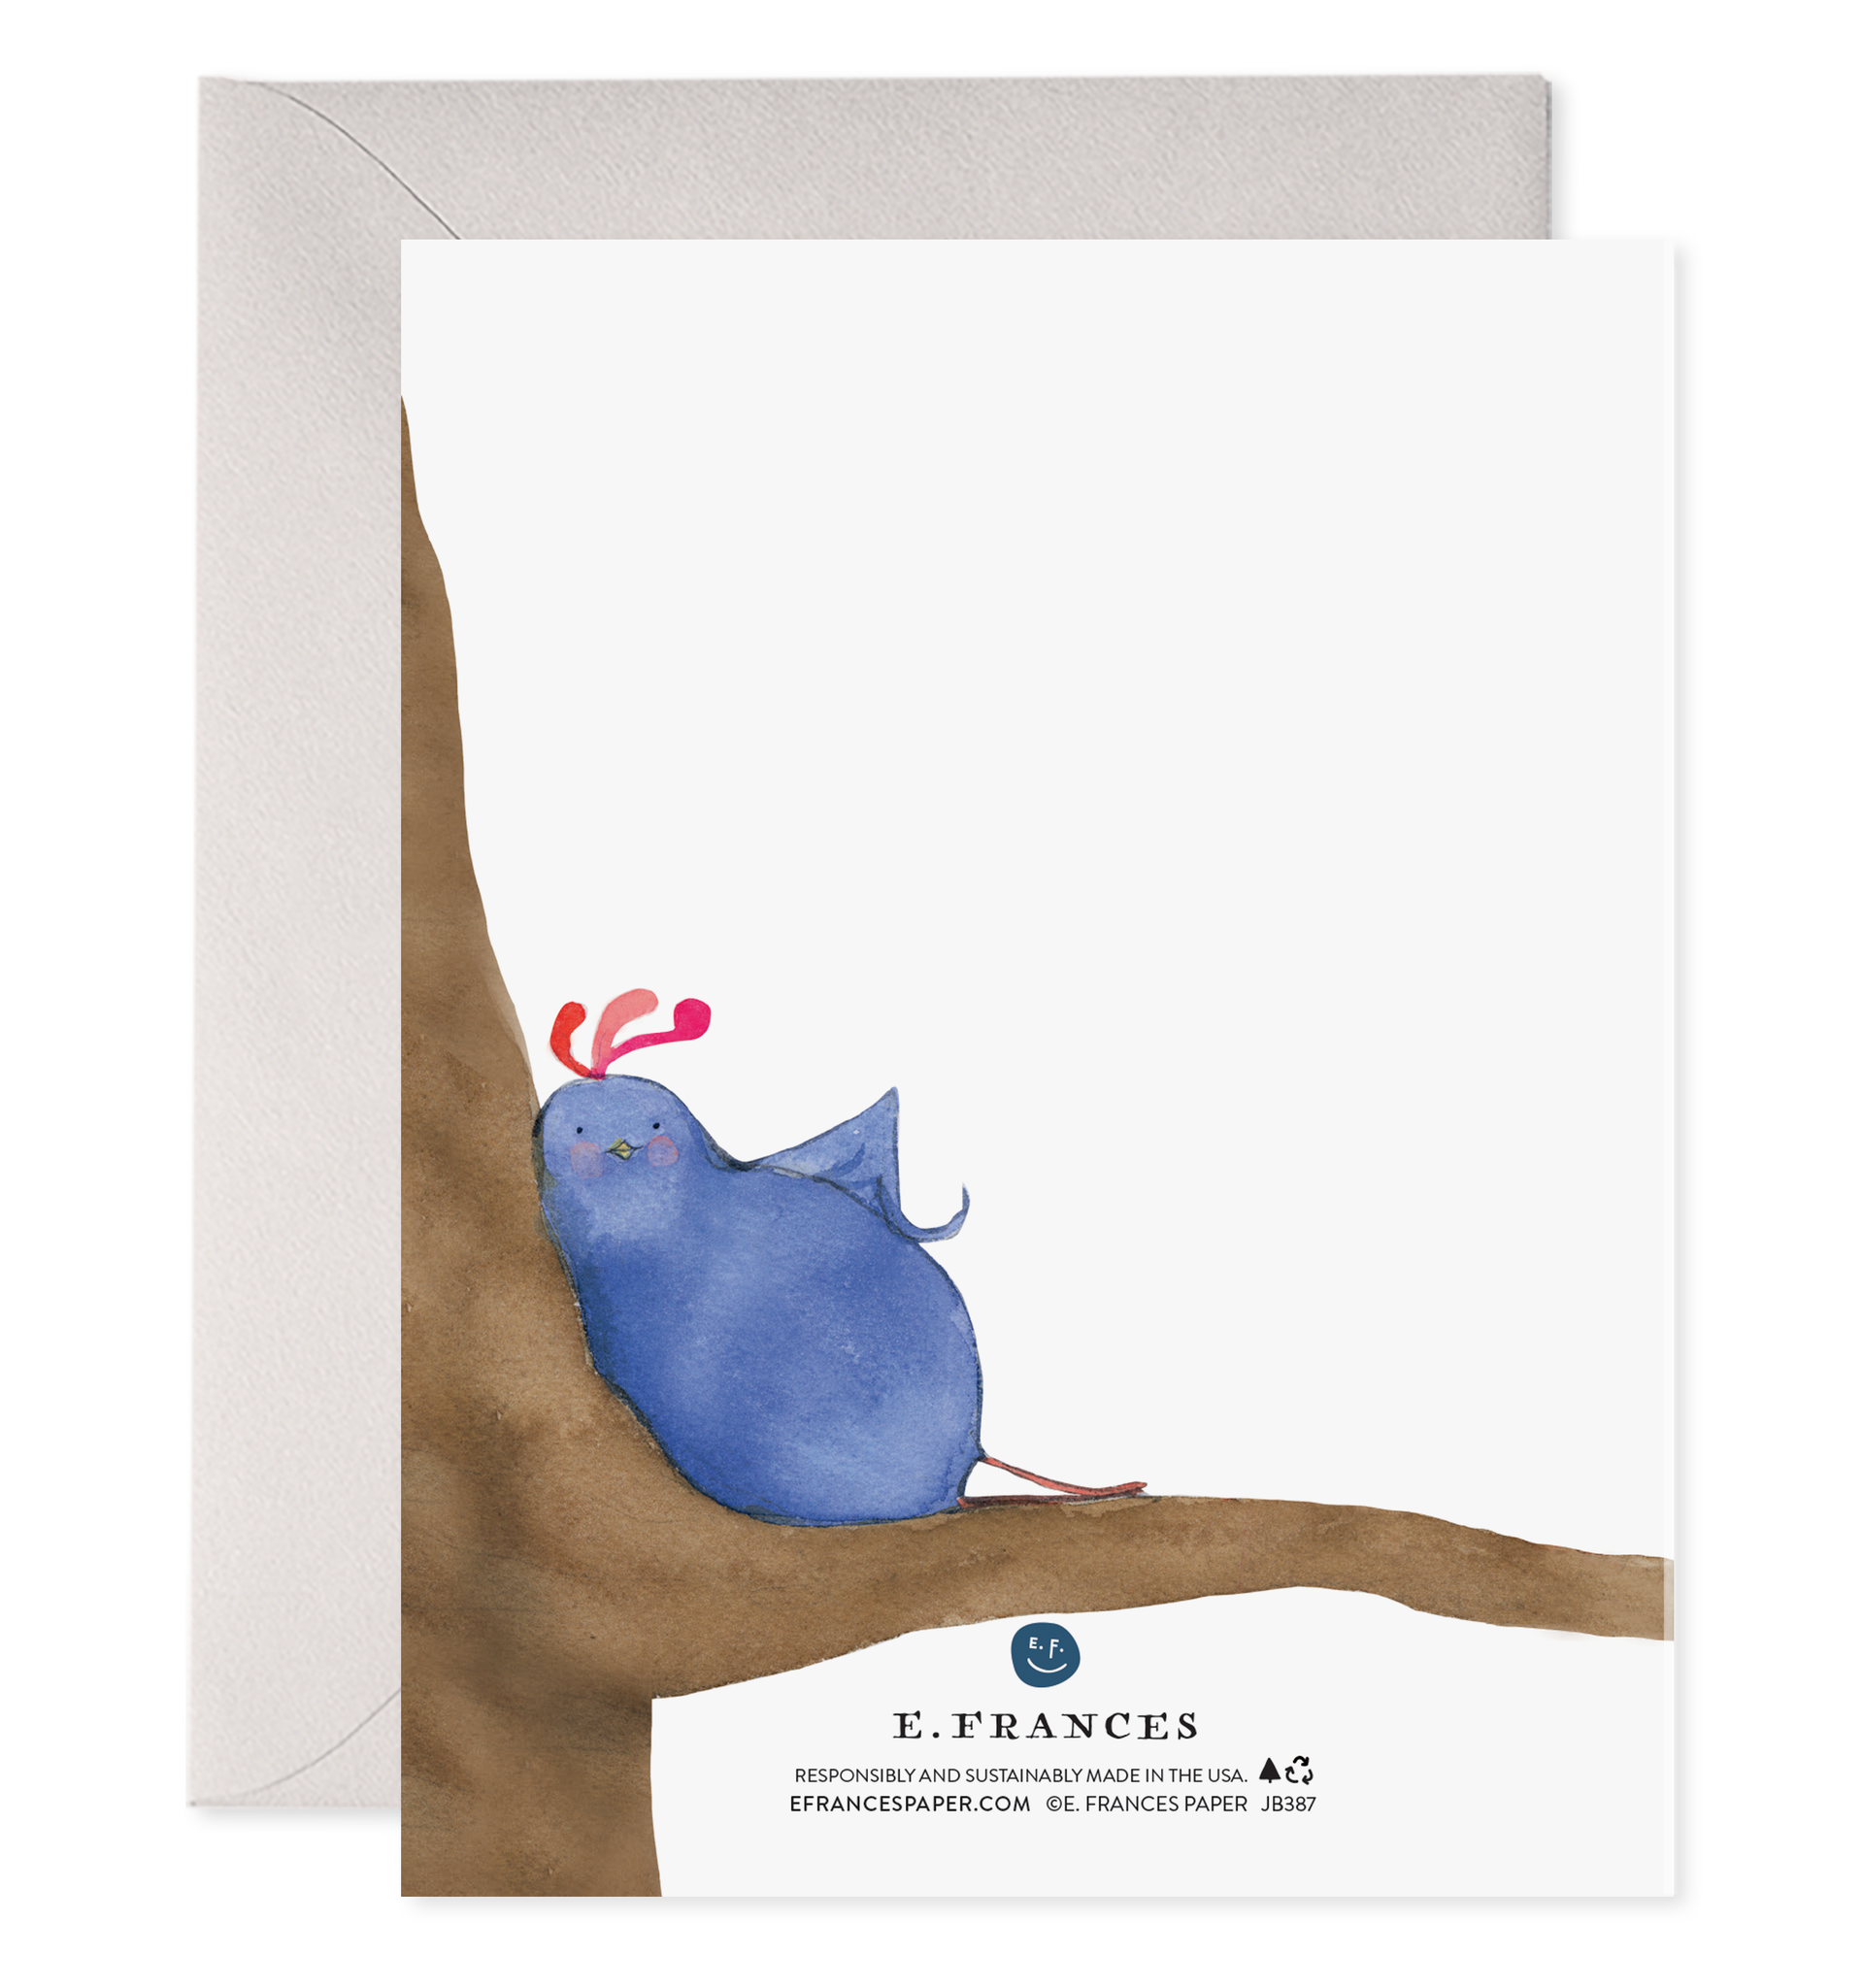 White background with an image of a blue bird with red feathers on its head laying on a branch in a brown tree.     